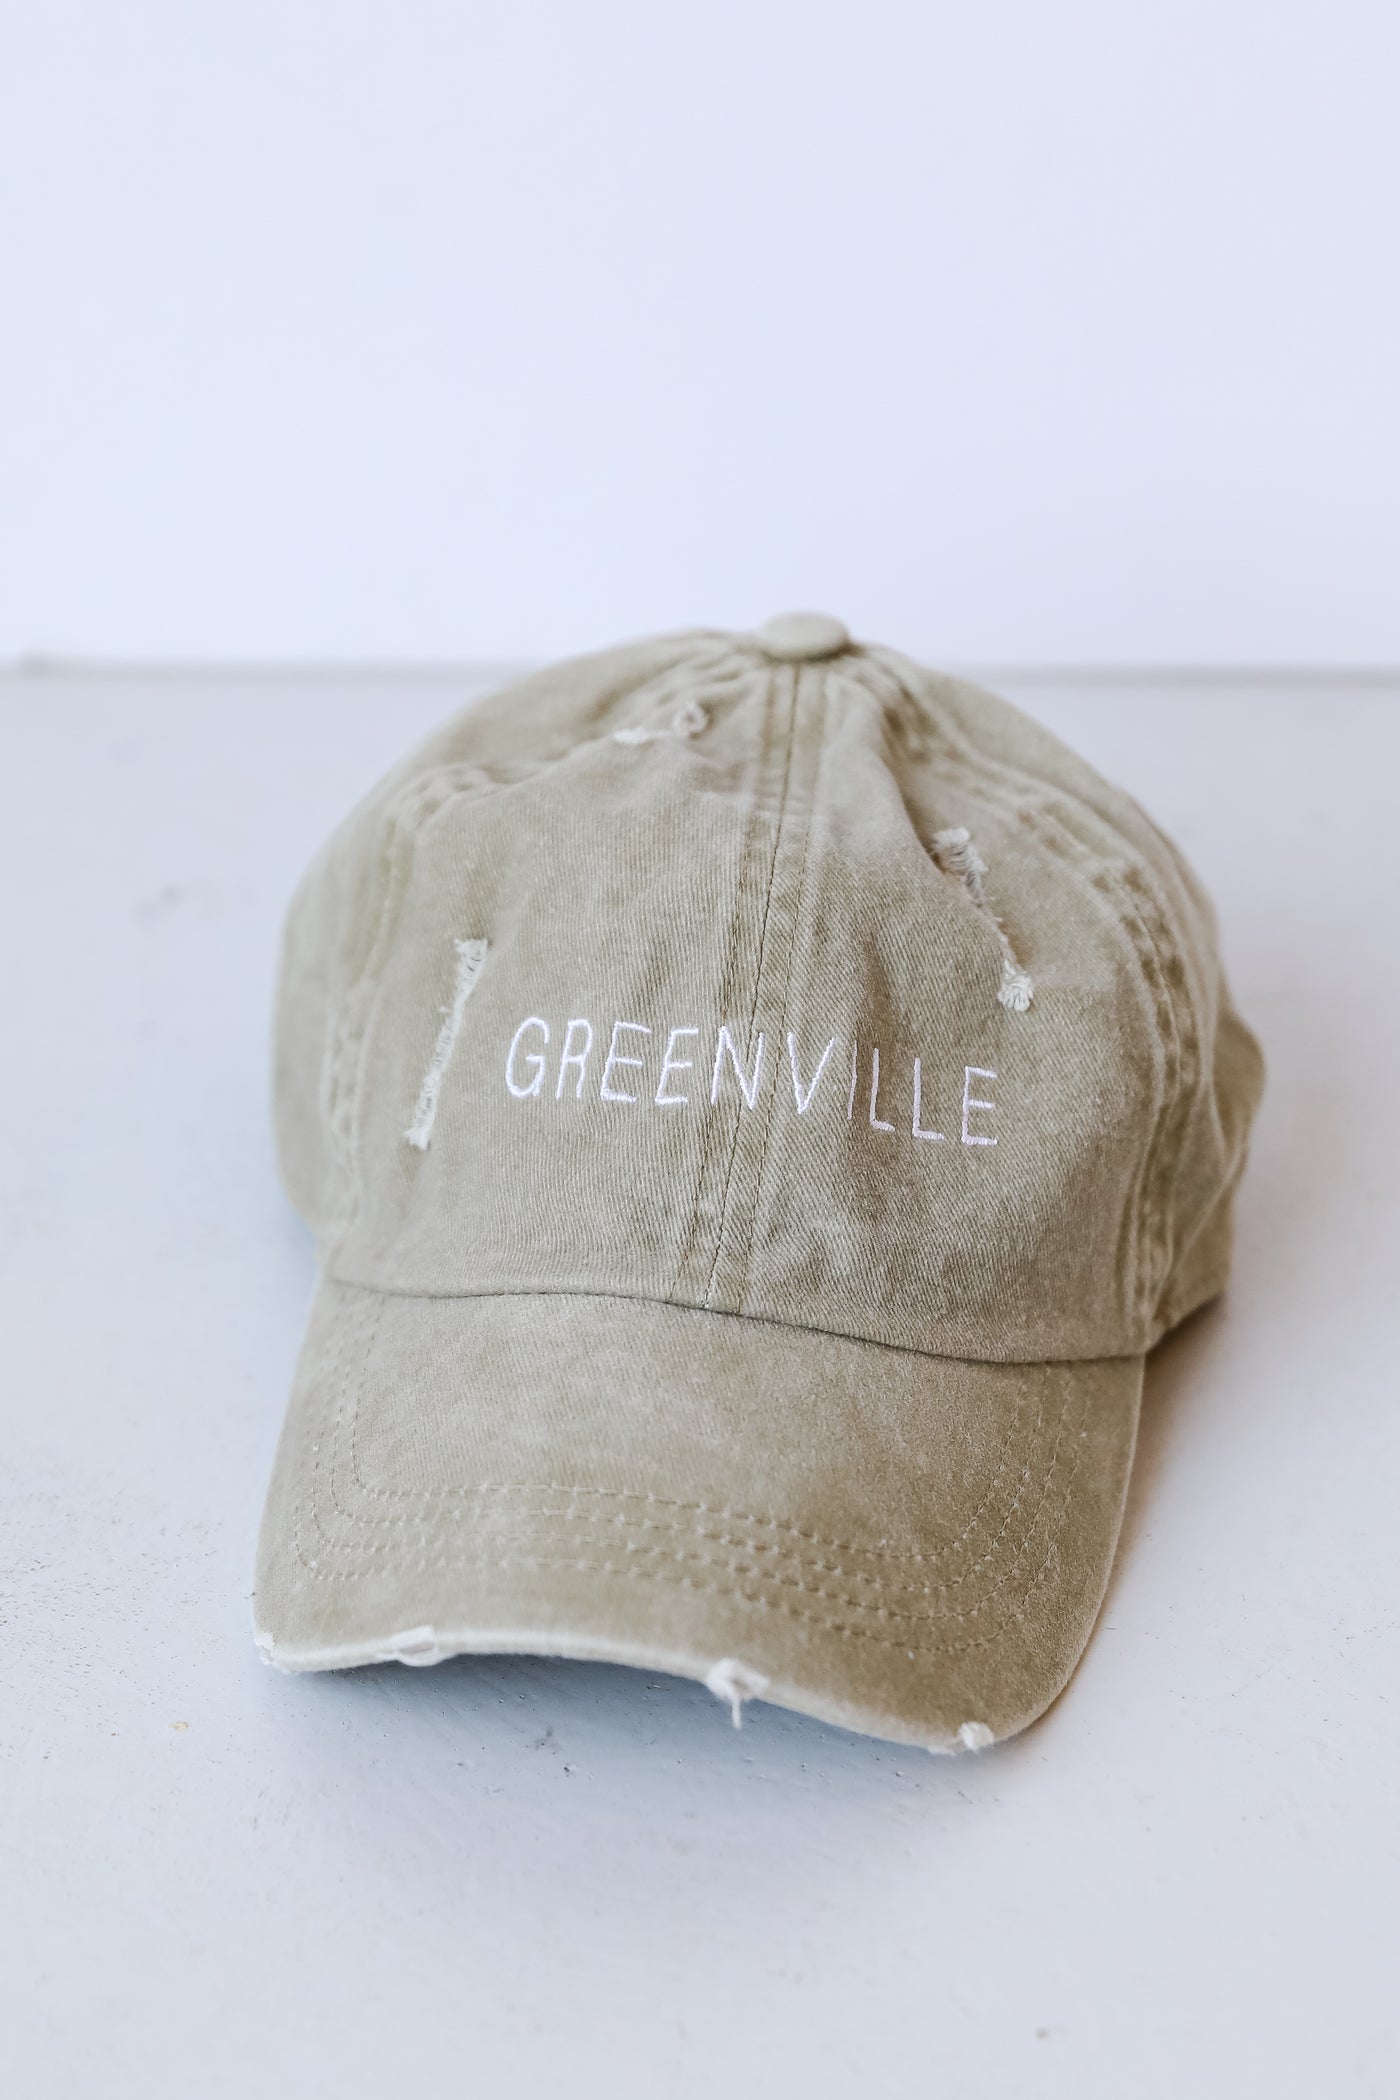 Greenville Vintage Embroidered Hat flat lay